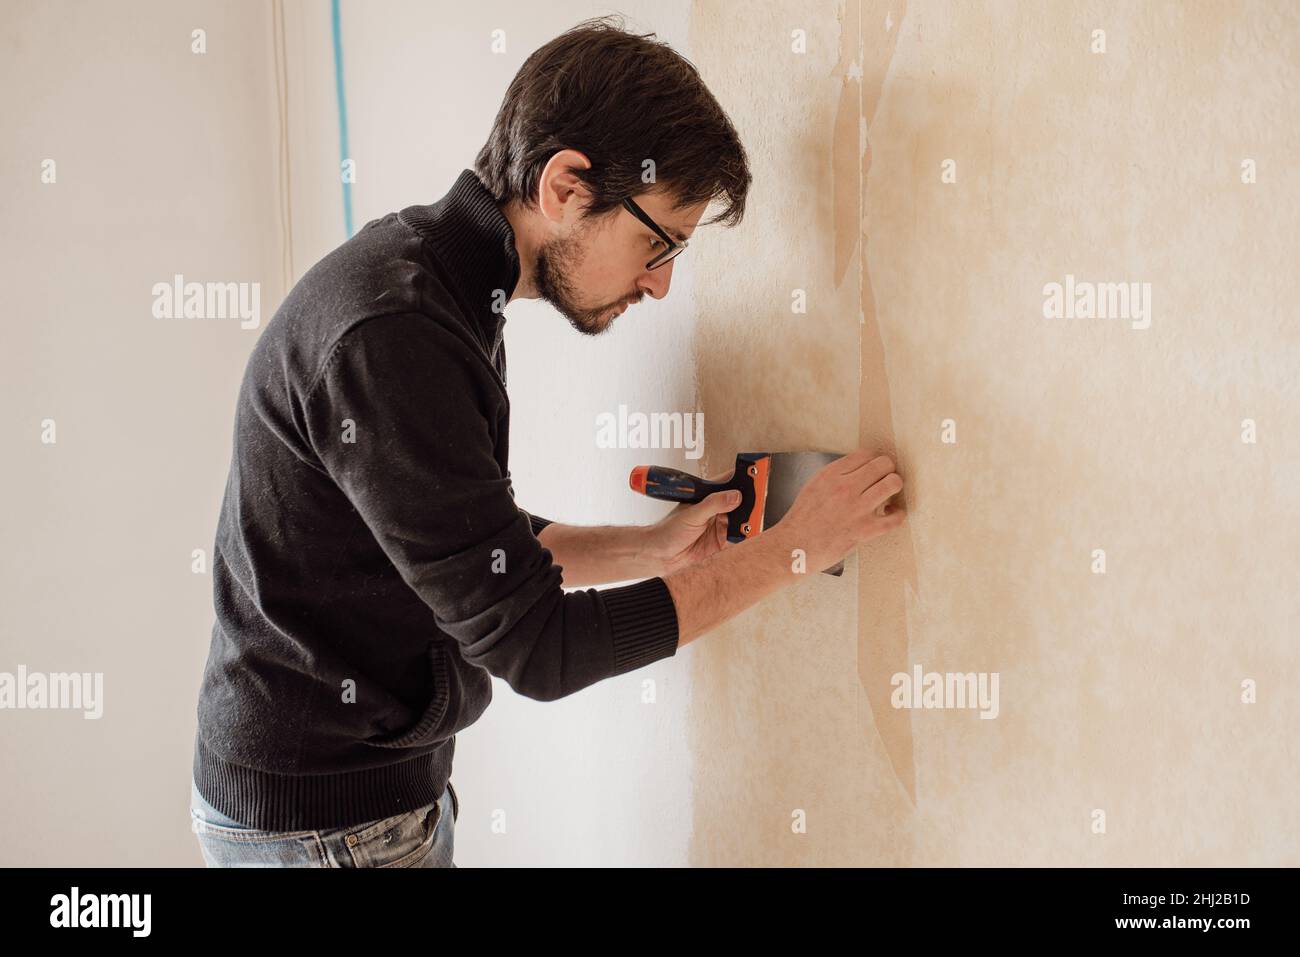 Man hand tearing off old wallpaper with scraper from wall. Home renovations. Stock Photo